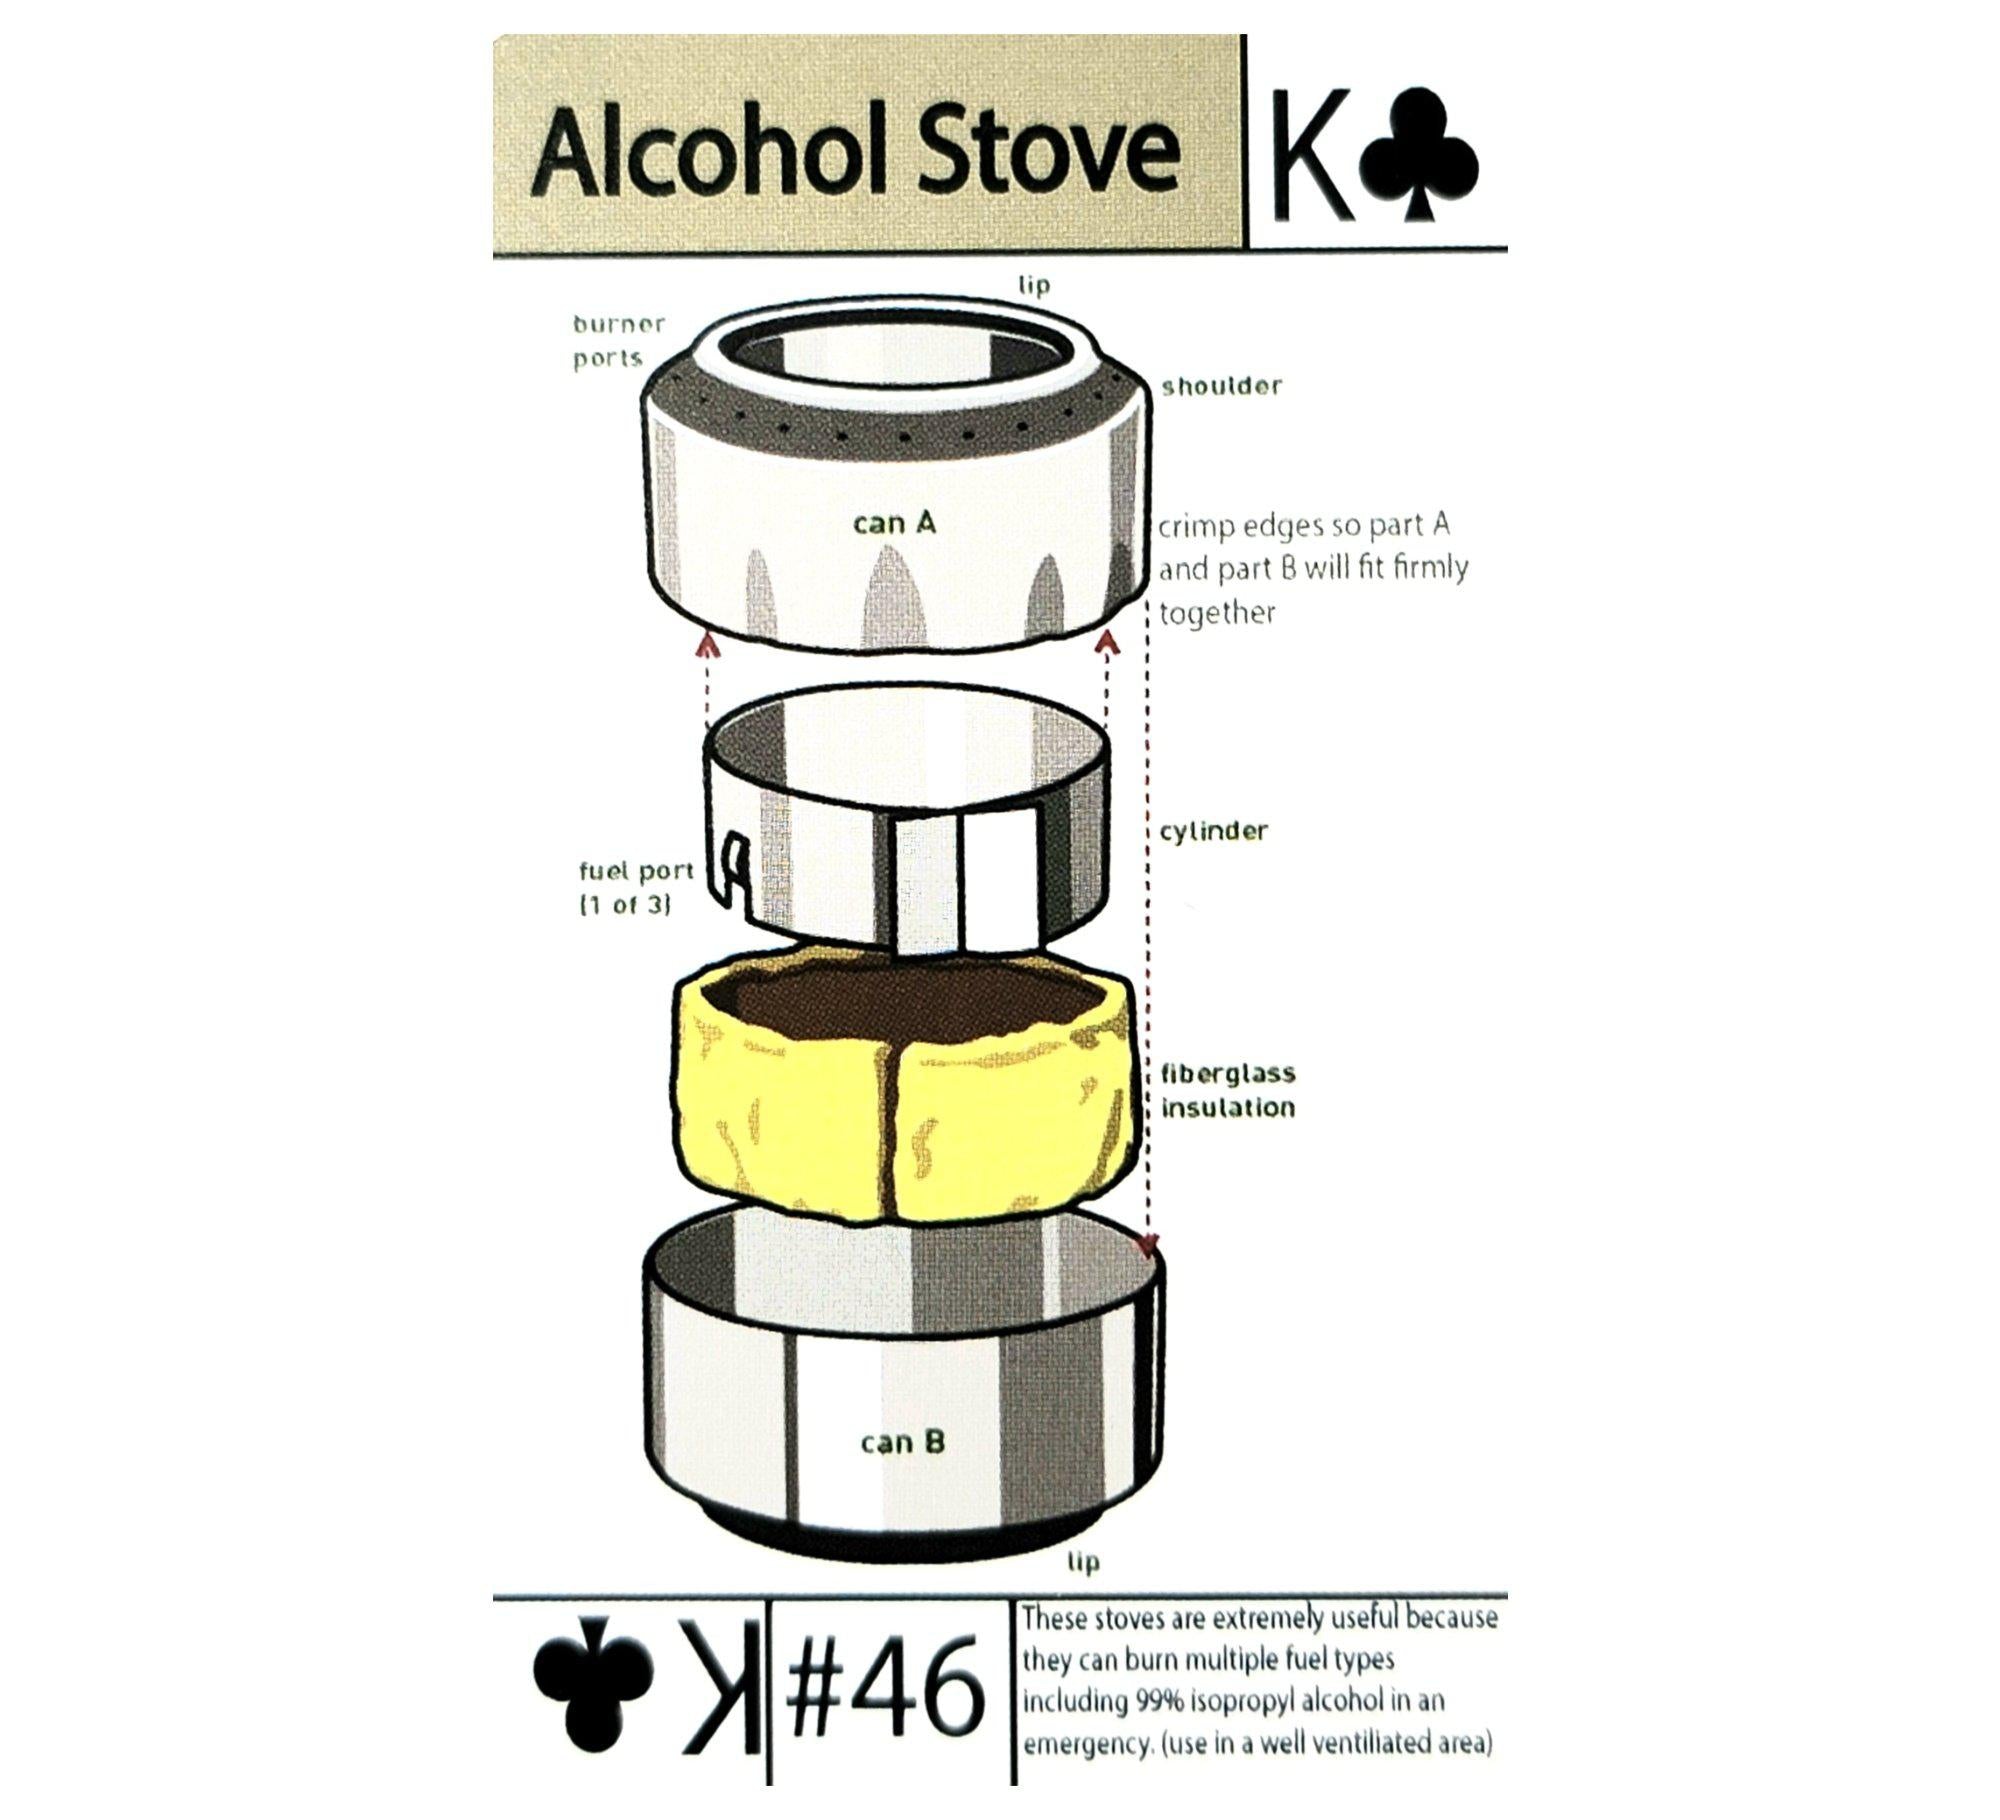 How to Make an Alcohol Stove or soda can stove diy alcohol stove